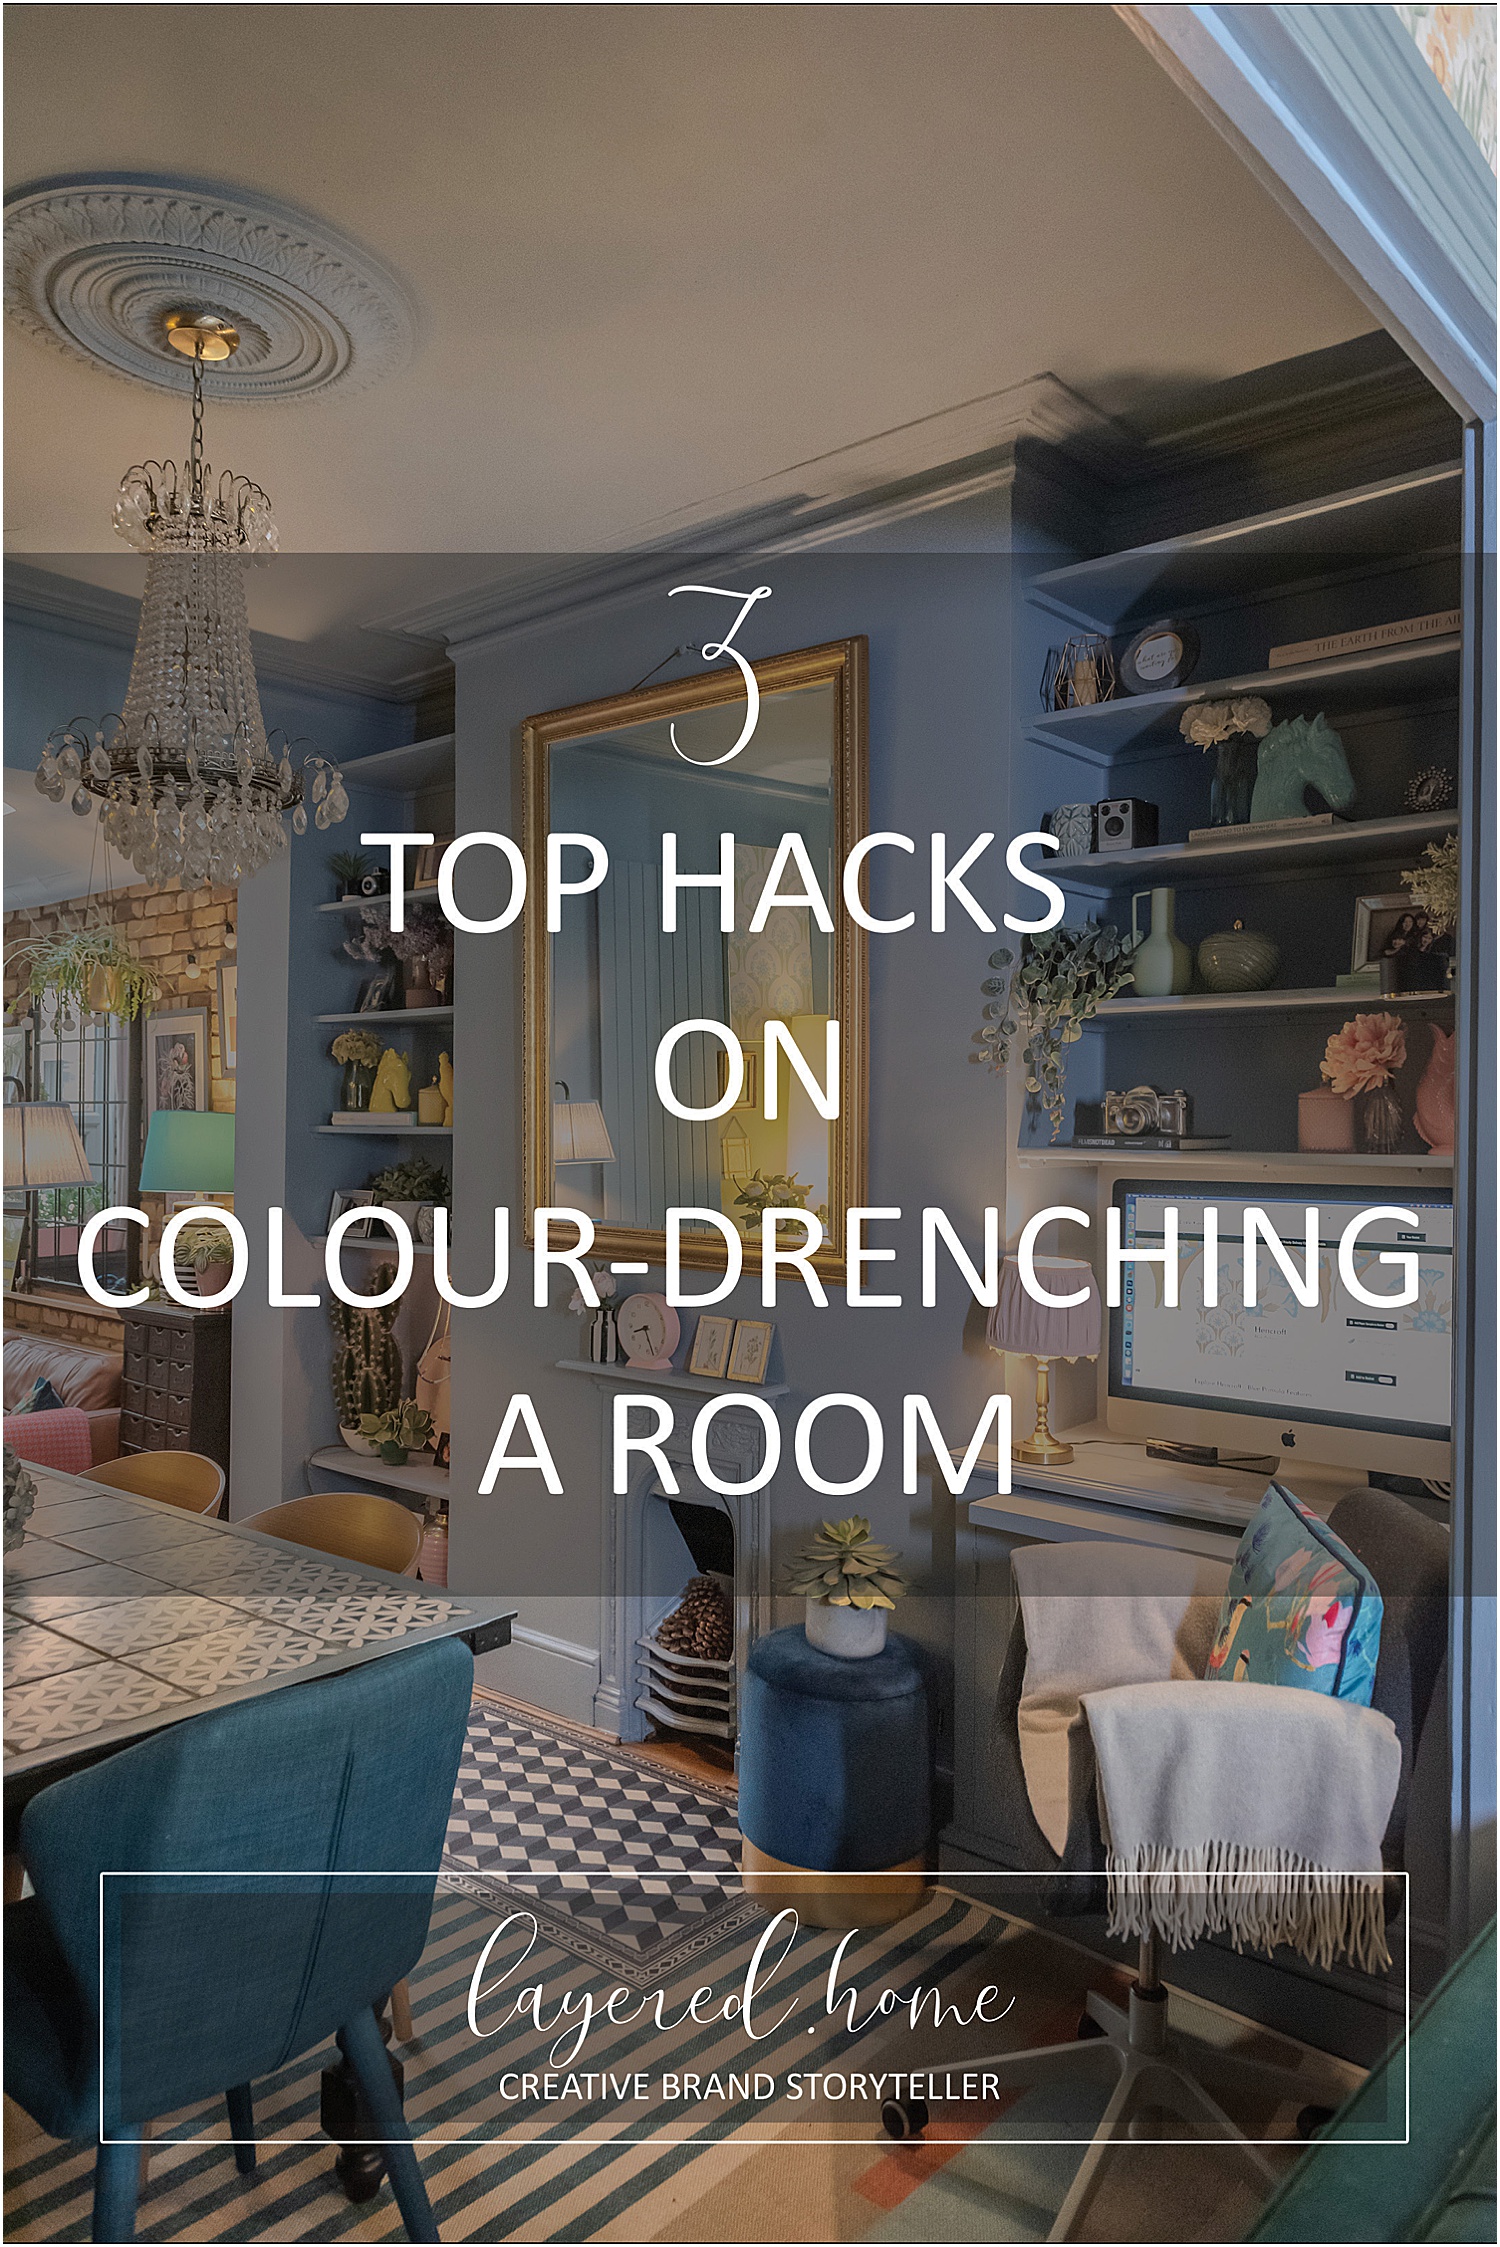 3-top-hacks-on-Colour-Drenching-a-room